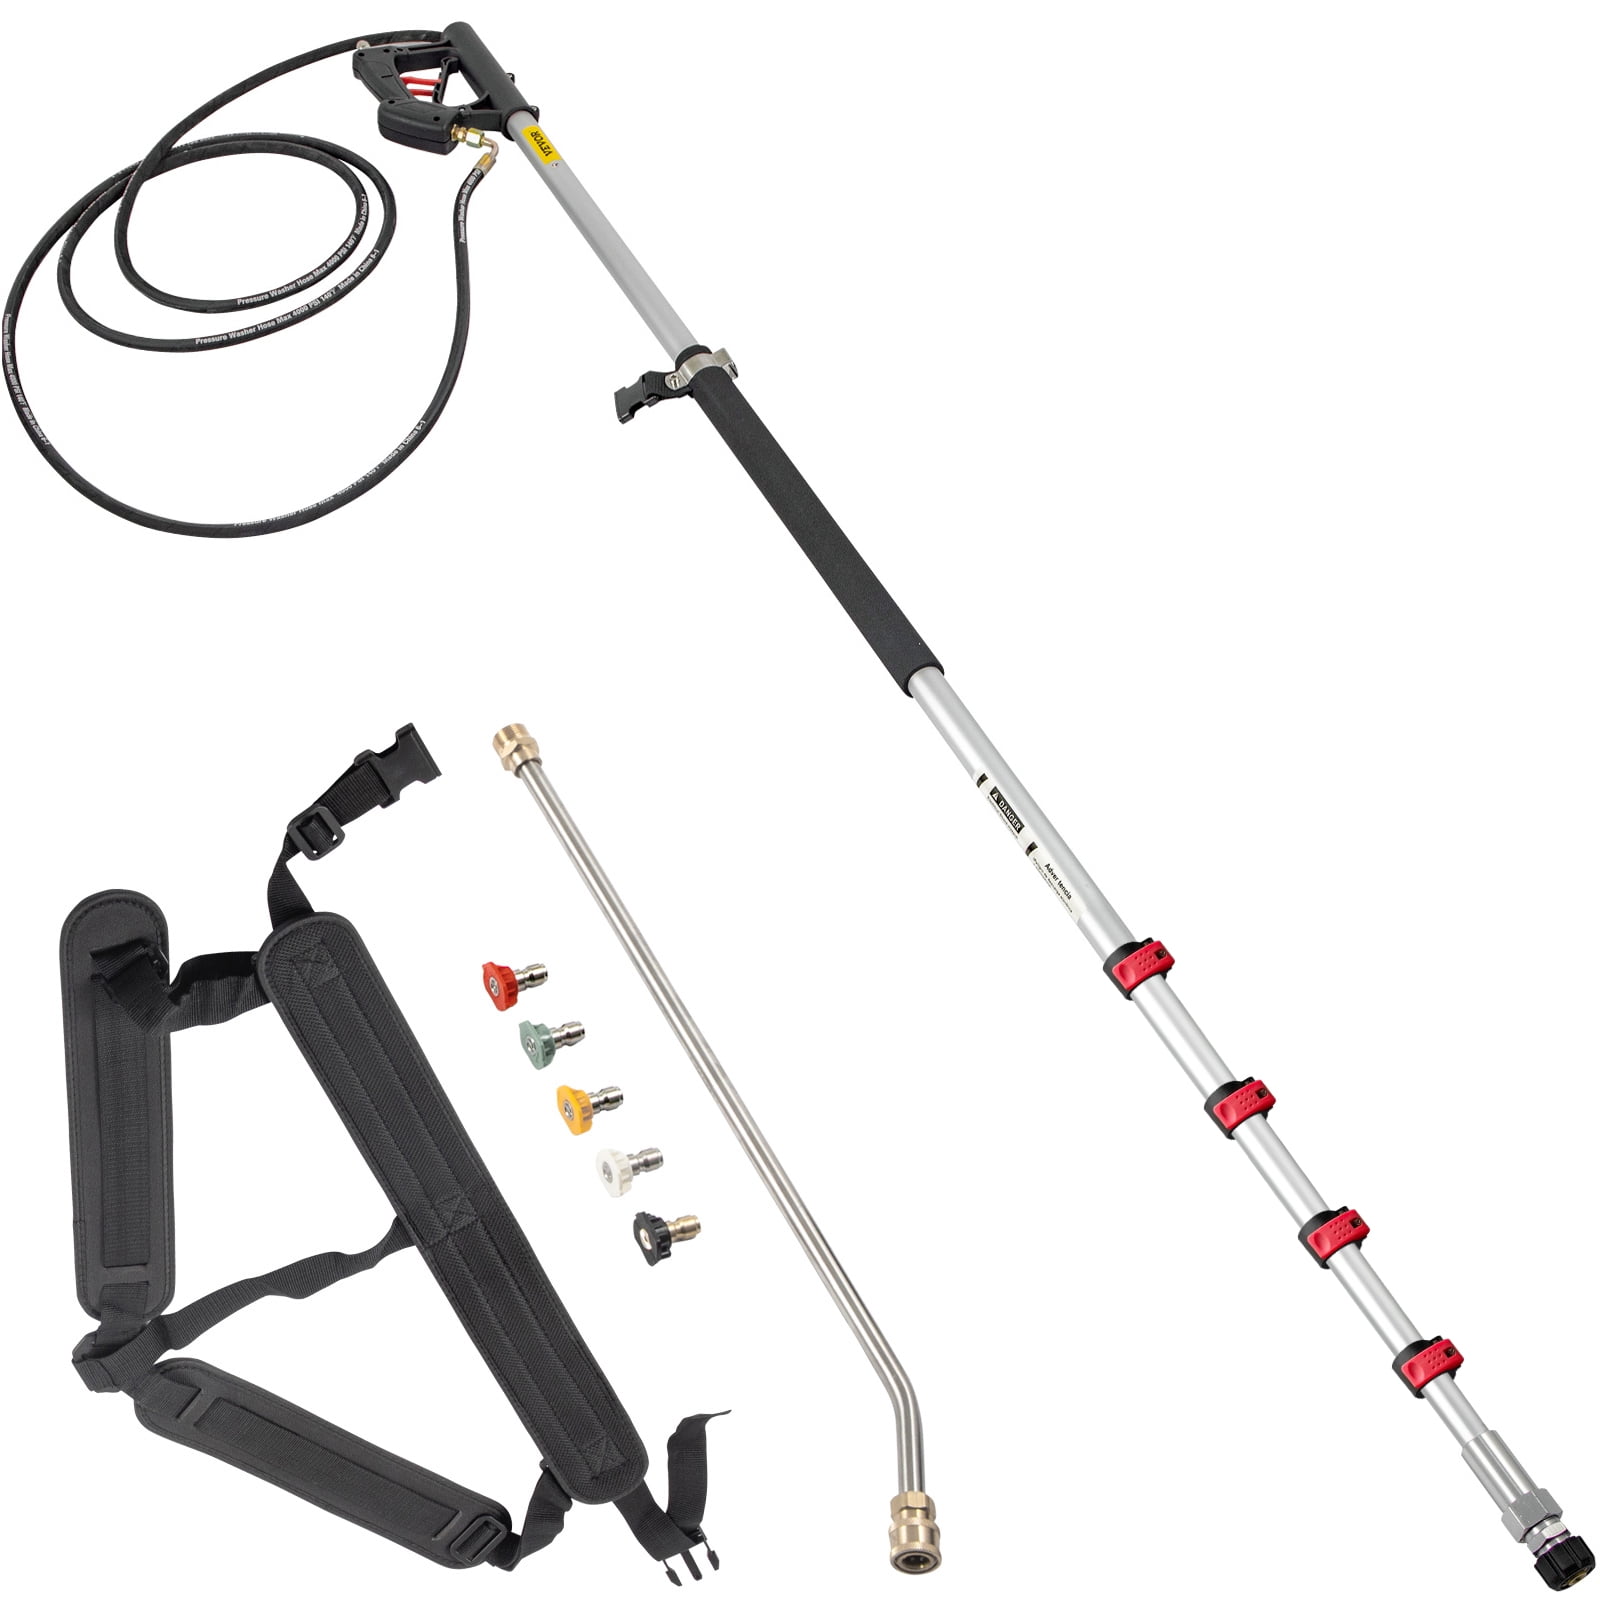 5,5m 18ft Telescopic Lance For KARCHER Pressure Washer with Nozzle and Belt 